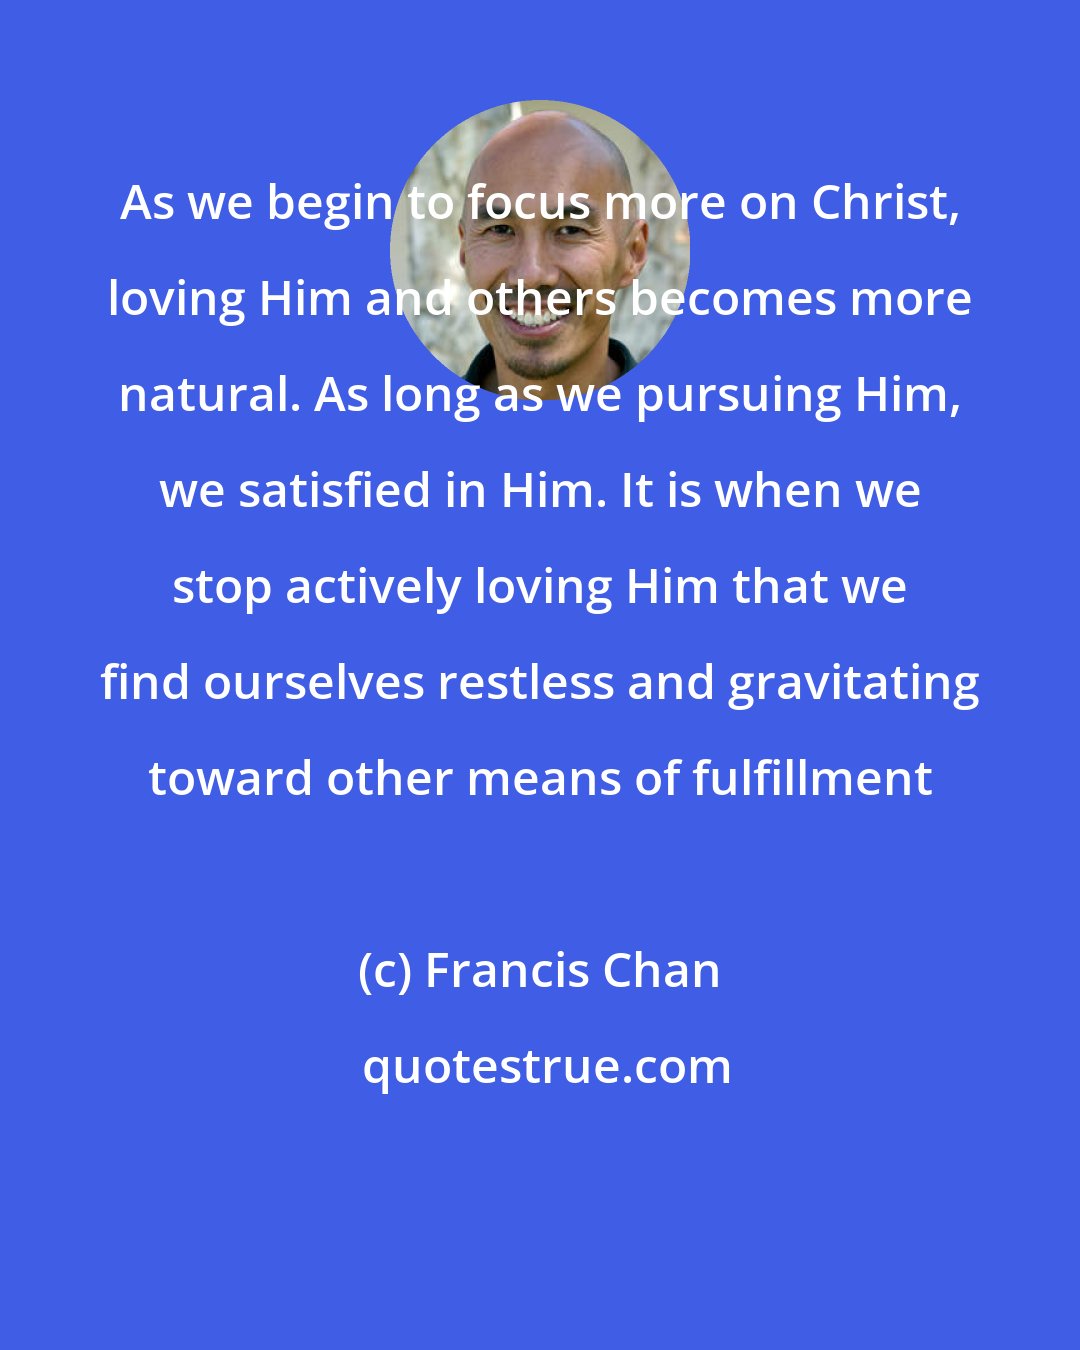 Francis Chan: As we begin to focus more on Christ, loving Him and others becomes more natural. As long as we pursuing Him, we satisfied in Him. It is when we stop actively loving Him that we find ourselves restless and gravitating toward other means of fulfillment